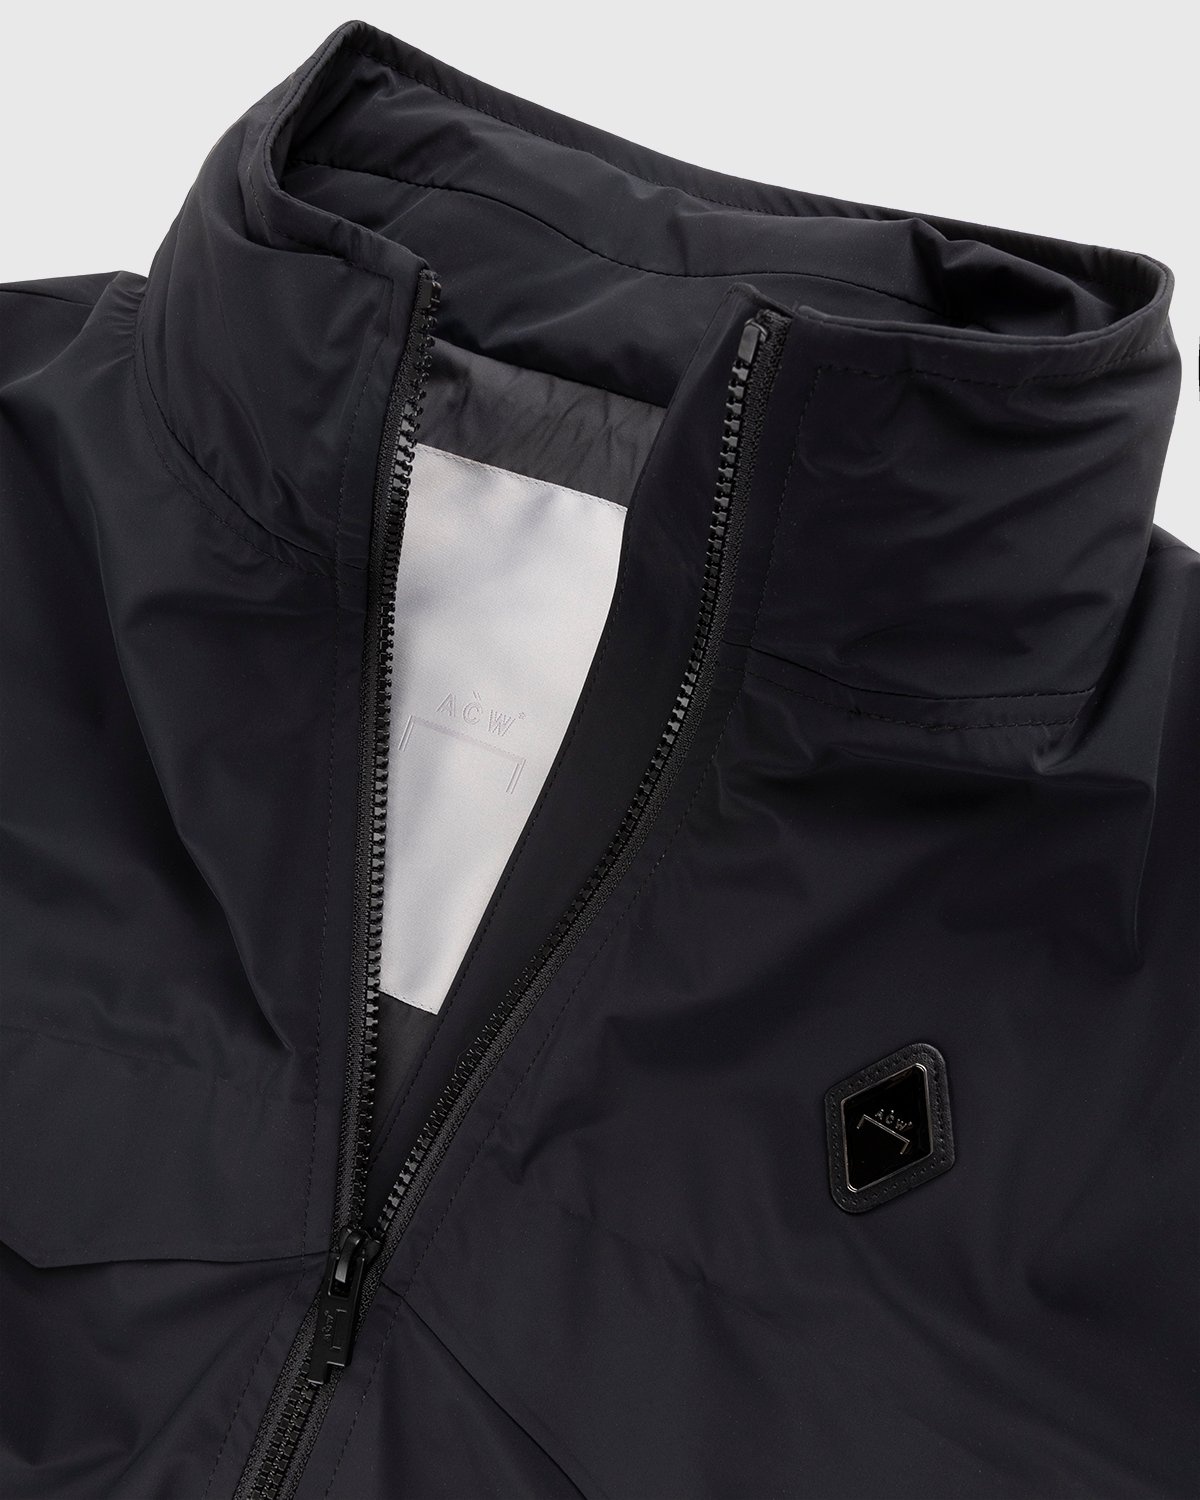 A-Cold-Wall* – Grasmoor Storm Jacket Black - Outerwear - Black - Image 3